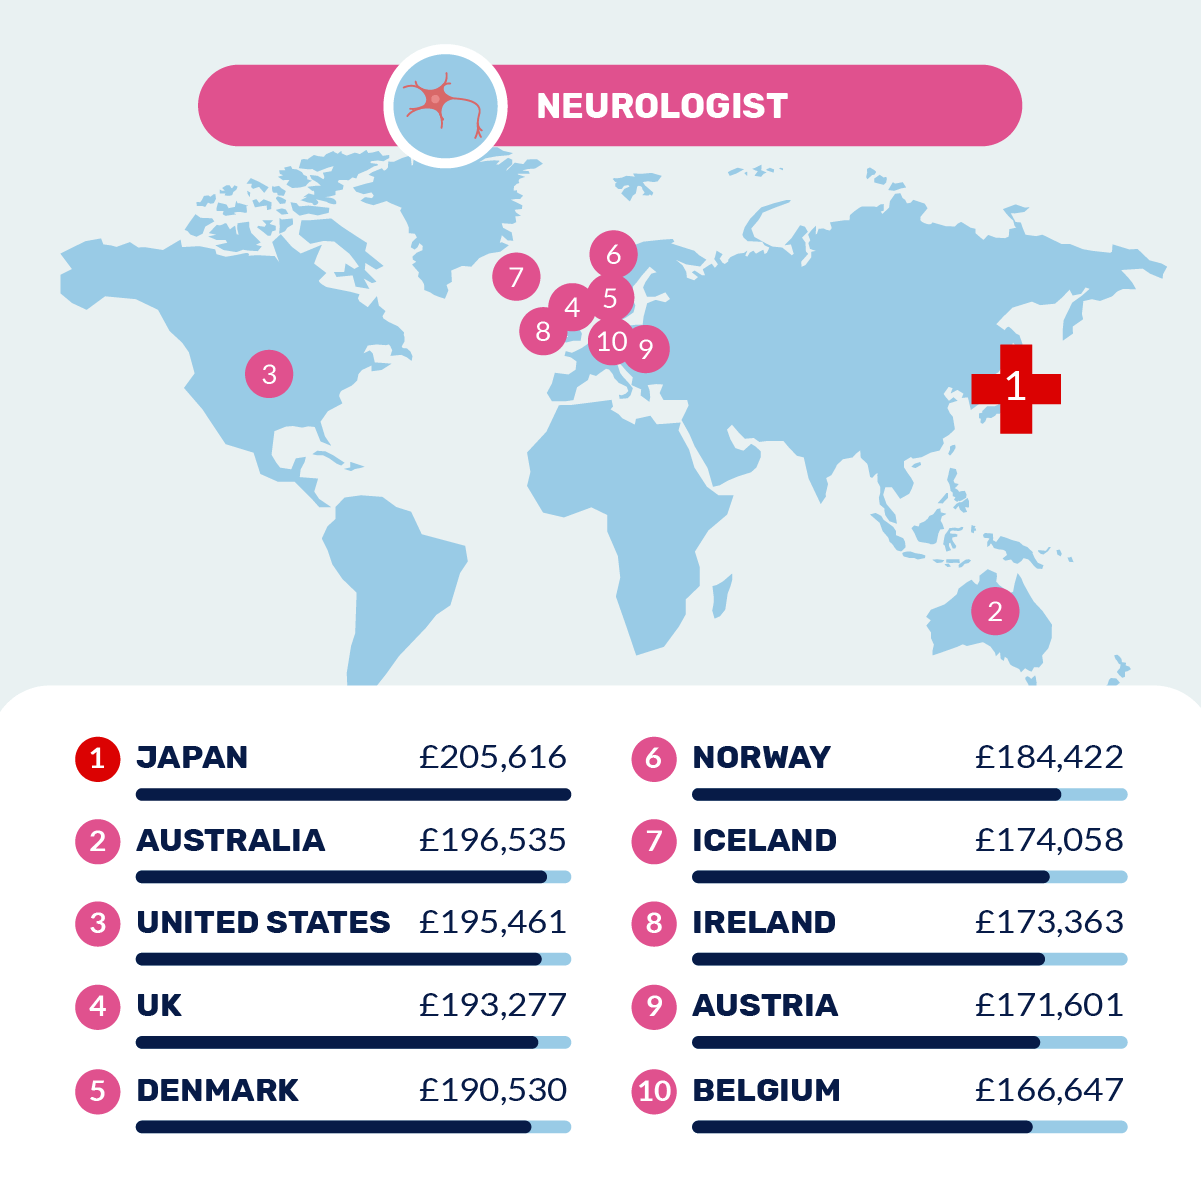 Average salaries of neurologists in the top 10 nations